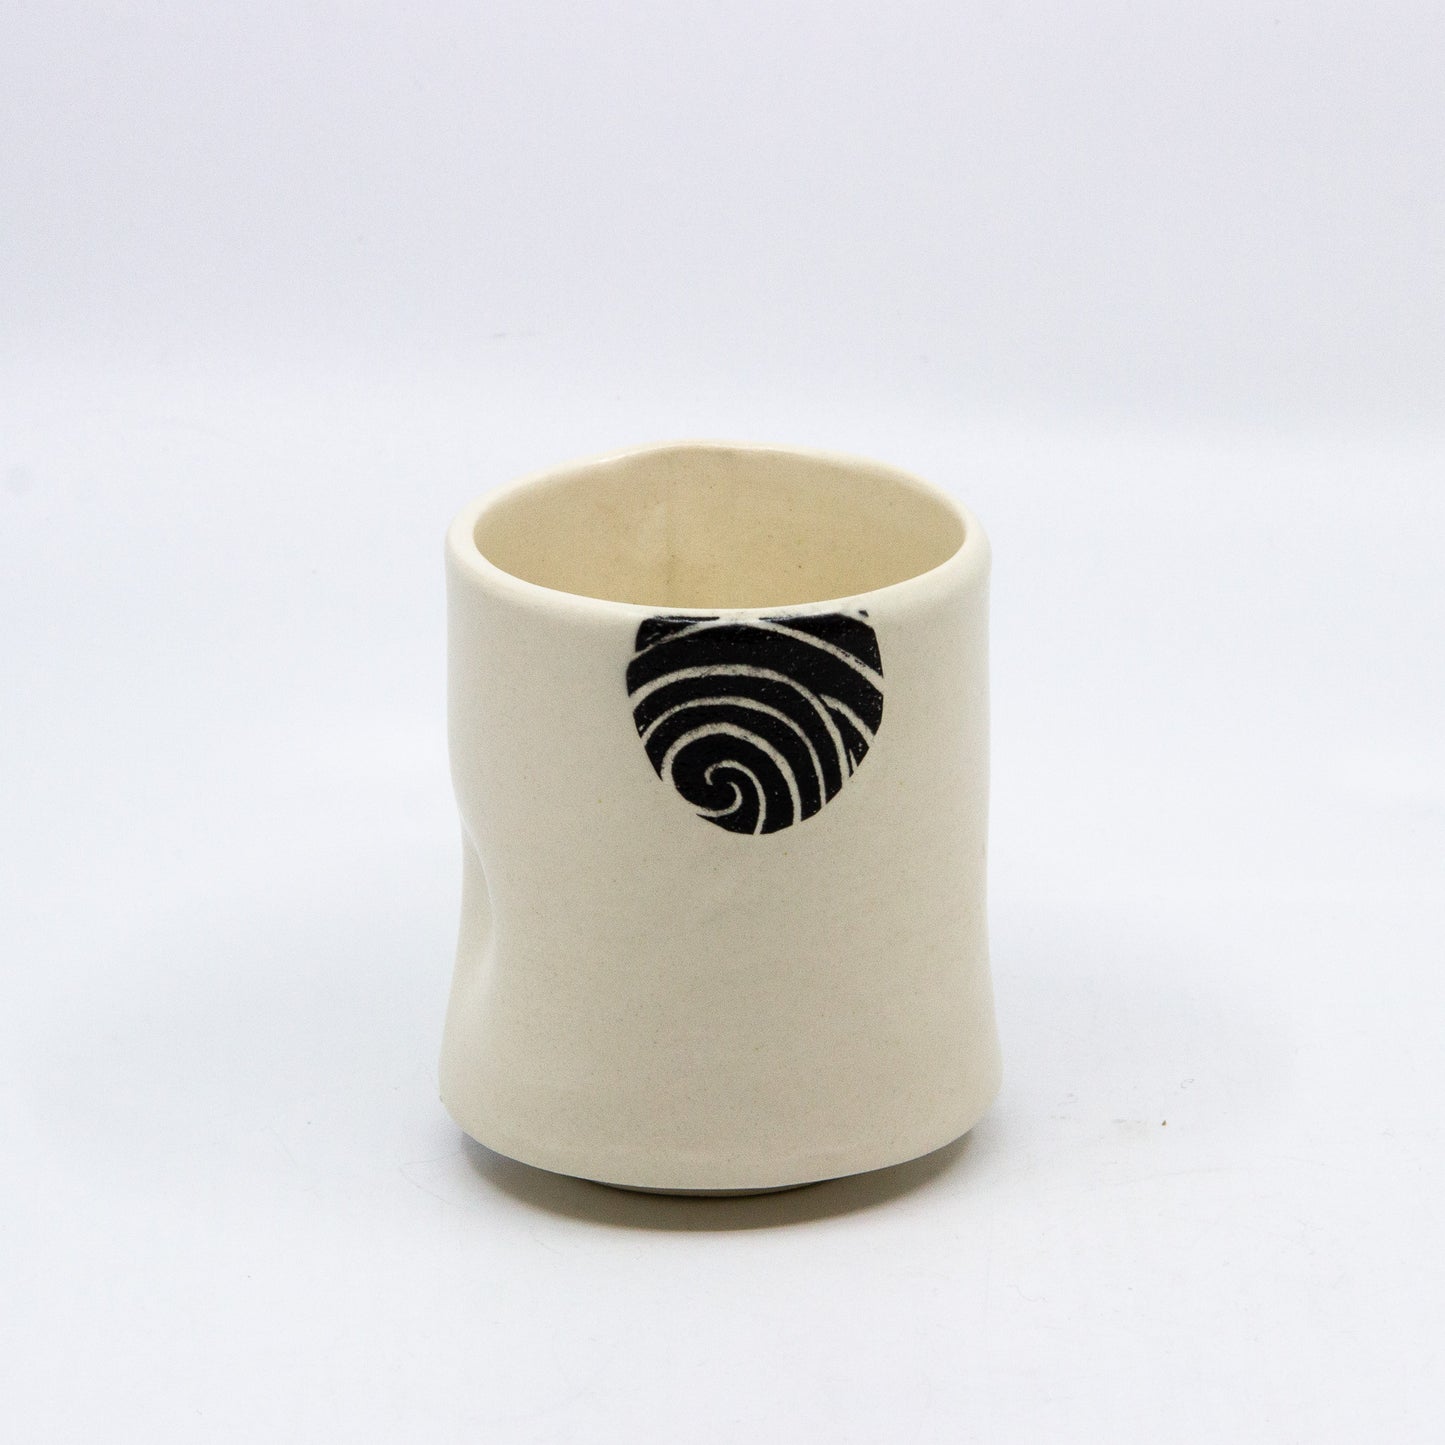 White tea cup with black circle pattern